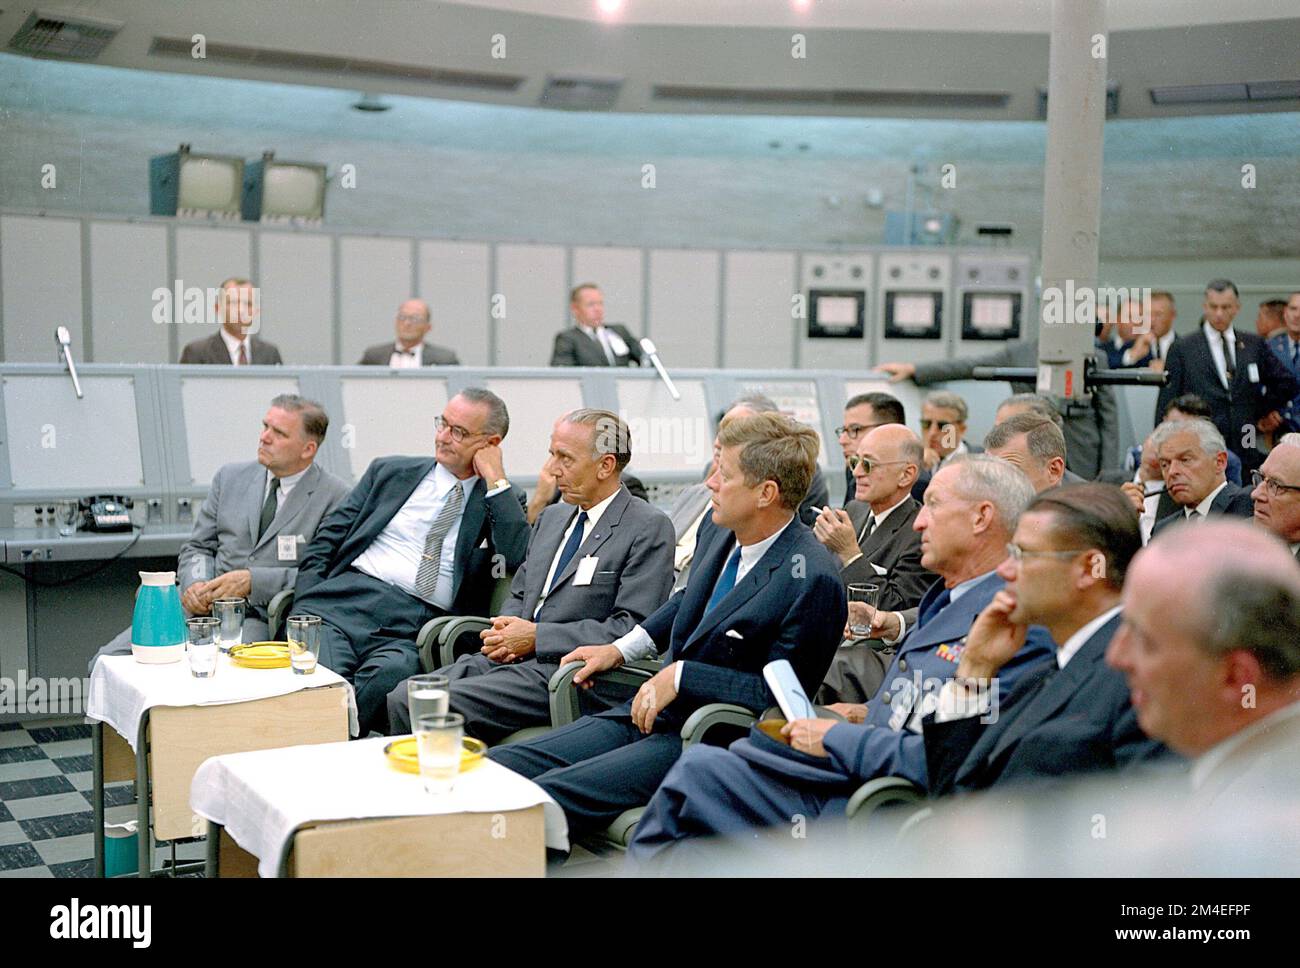 President John F Kennedy attending a briefing given by Major Rocco Petroneat Cape Canaveral on September 11, 1962. With him in the front row are (from left) NASA administrator James Webb, Vice President Lyndon Johnson, NASA Launch Center director Kurt Debus, Lieutenant General Leighton I. Davis and Secretary of Defense Robert McNamara. Stock Photo